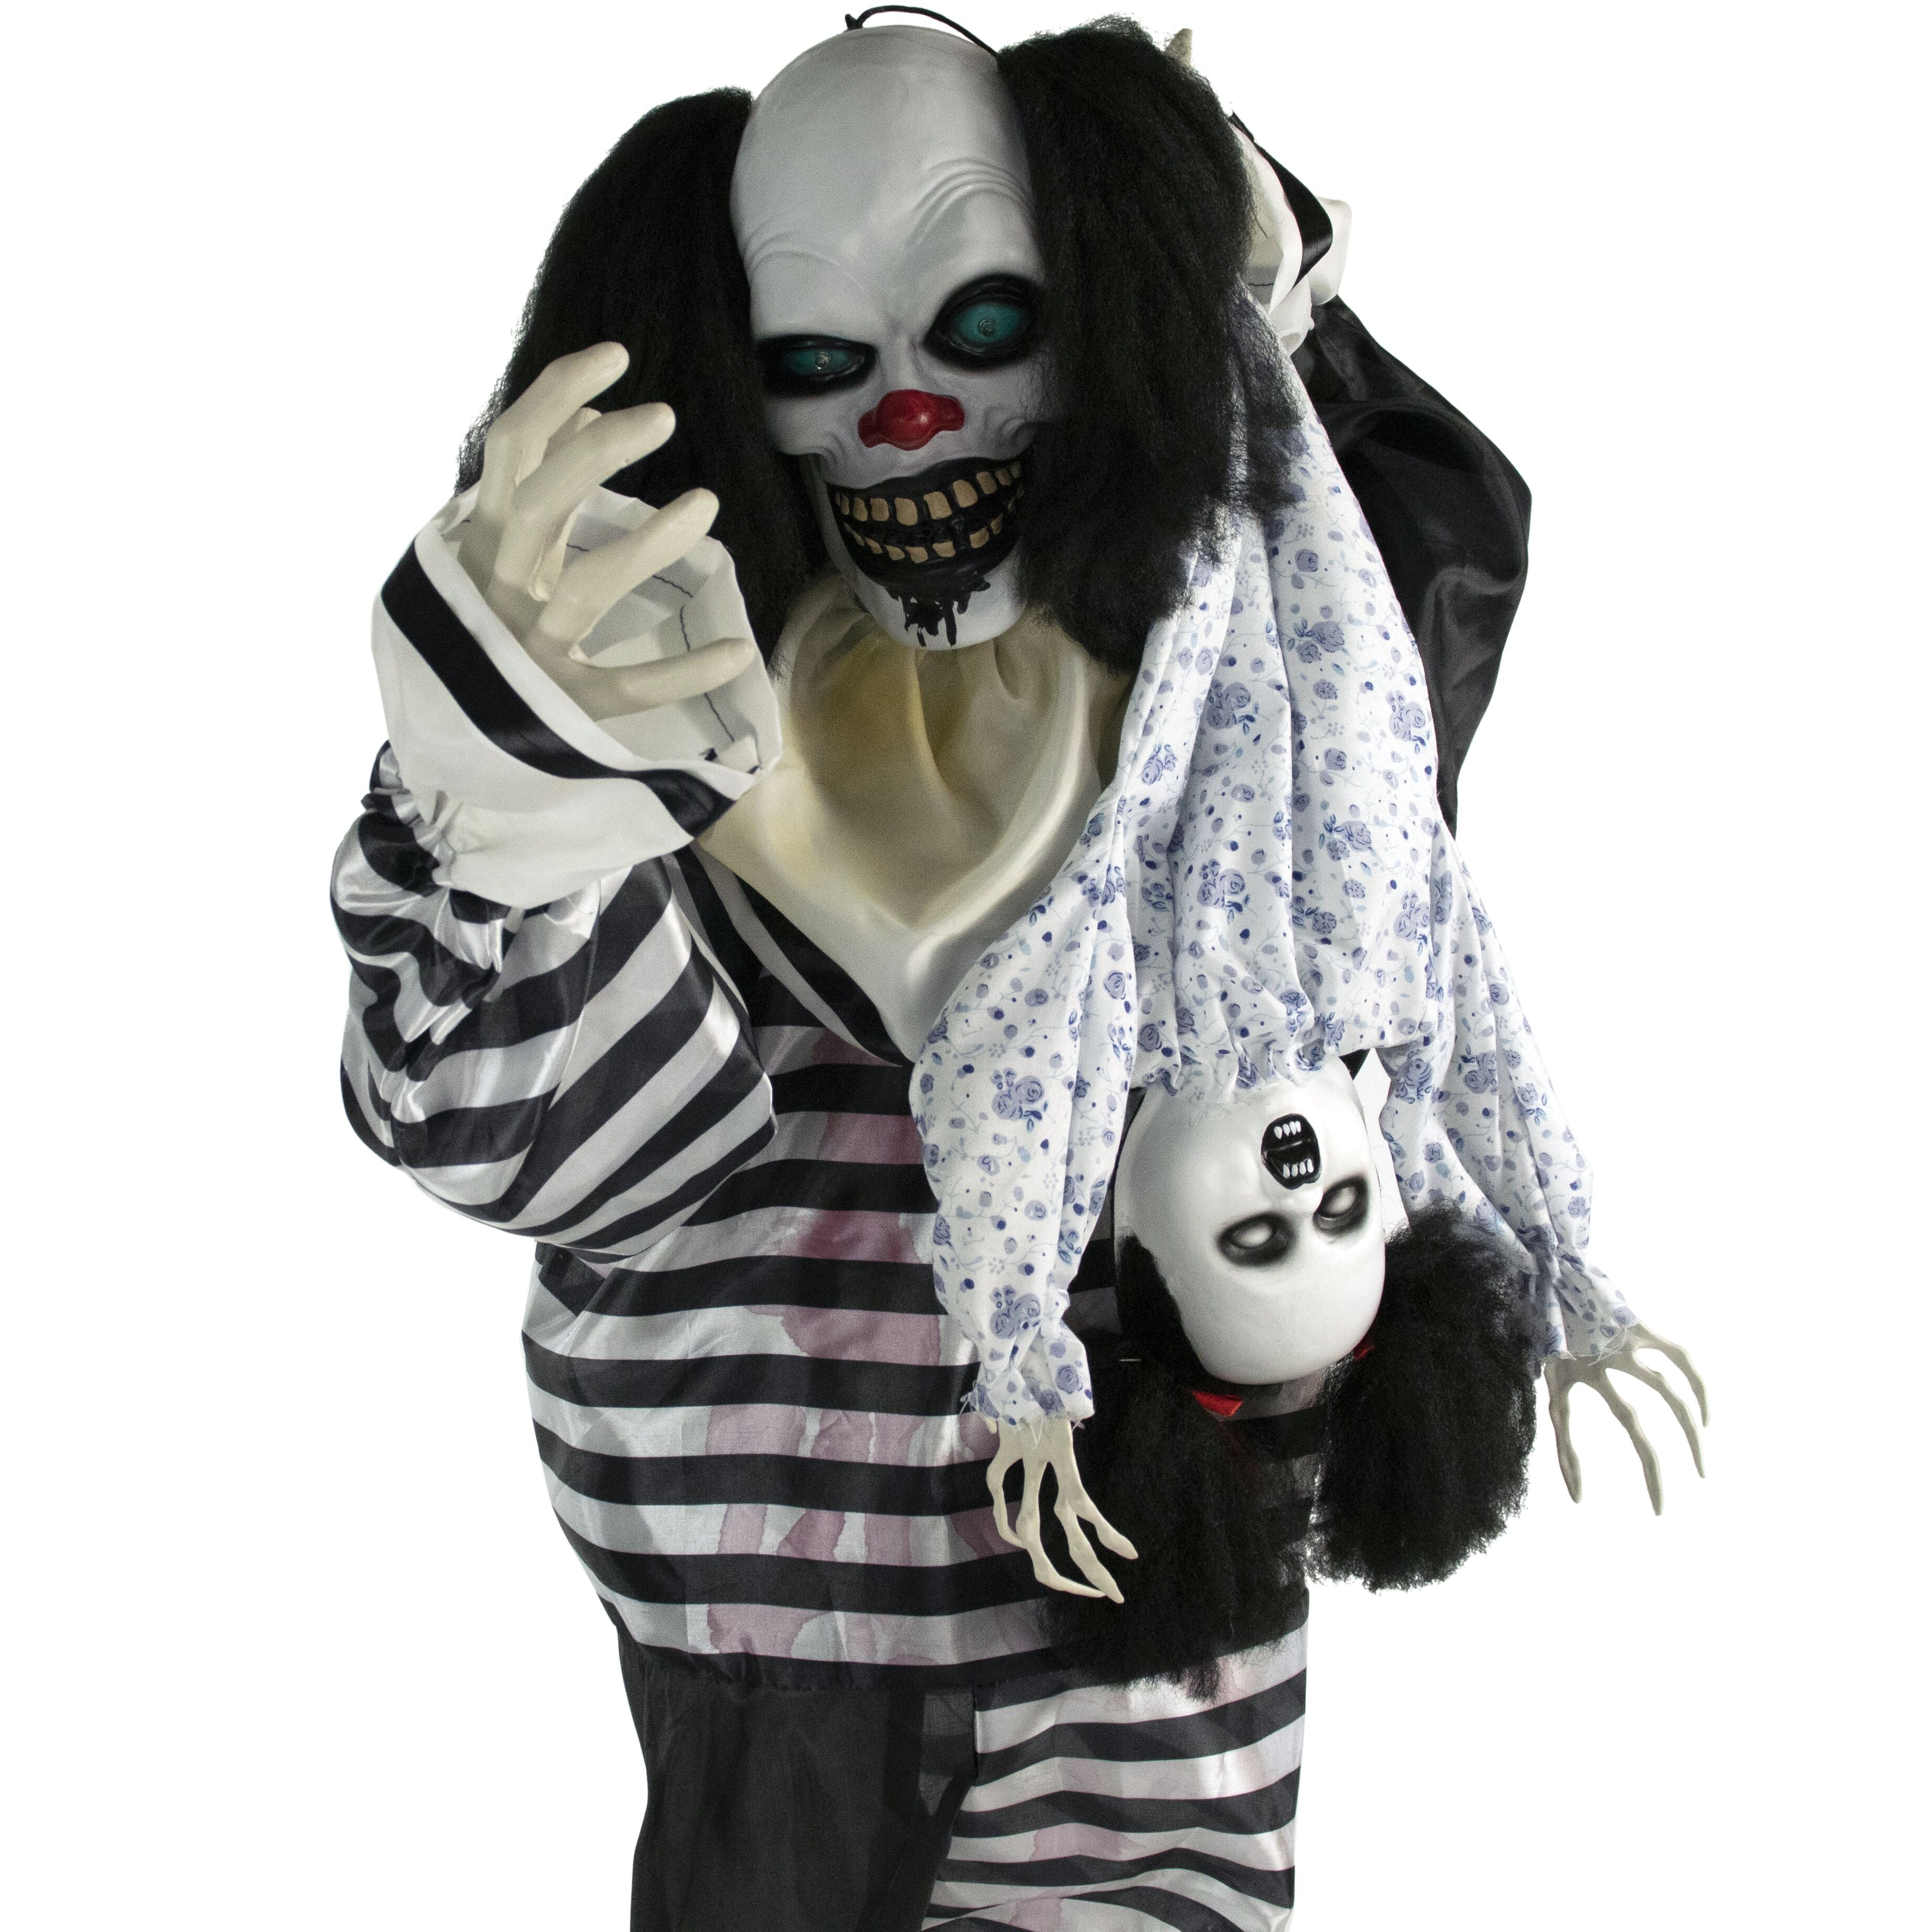 Haunted Hill Farm -  64-In. Wally the Animatronic Talking Clown with Doll, Indoor or Covered Outdoor Halloween Decoration